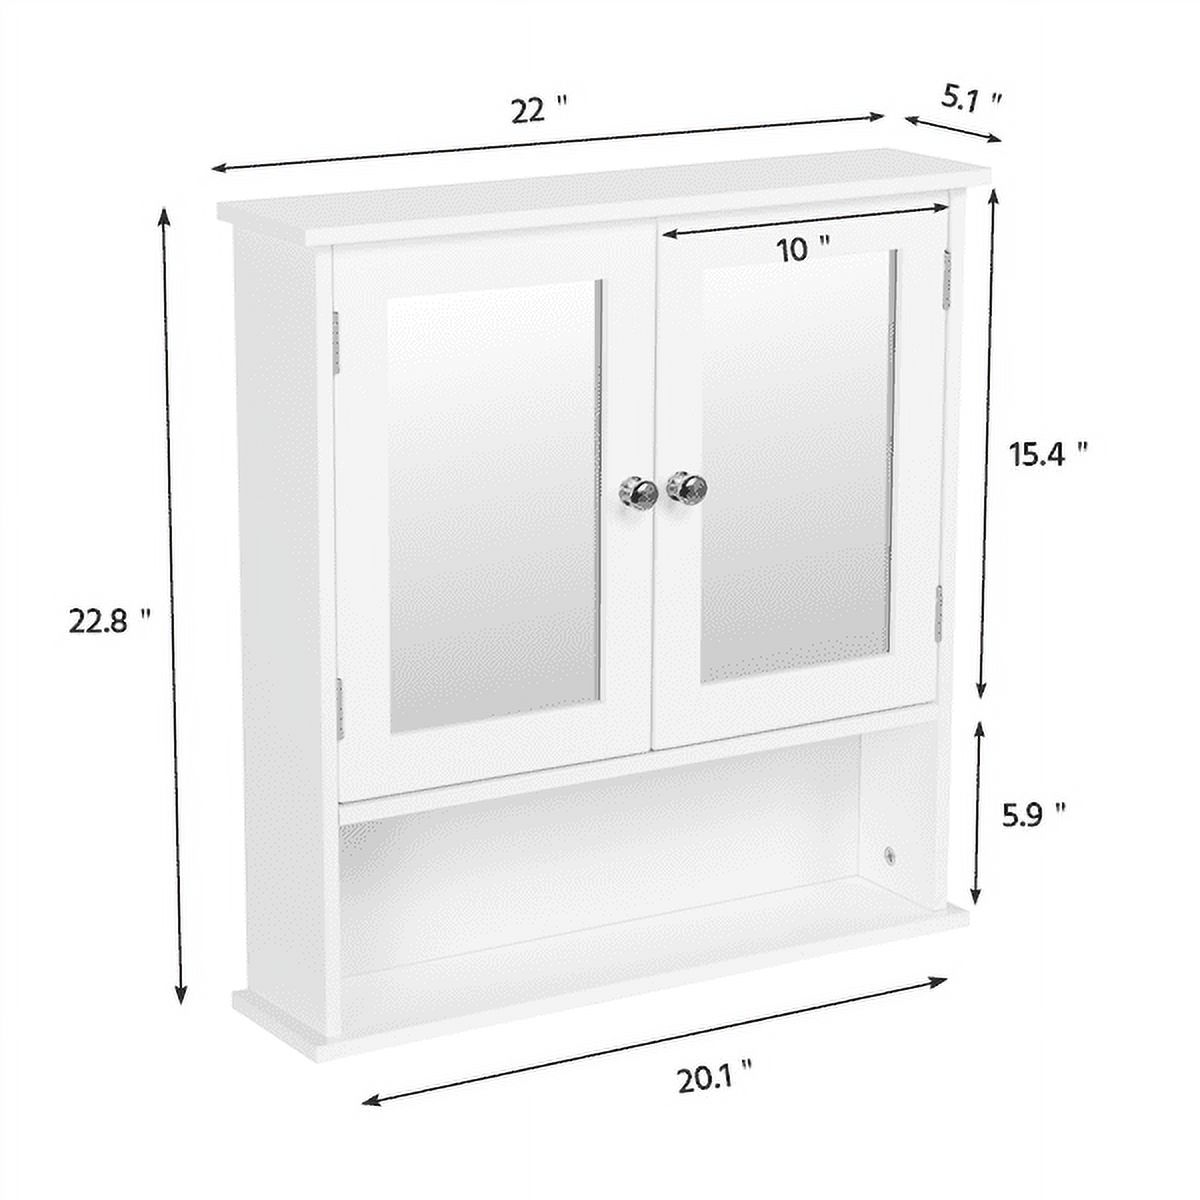 Topeakmart Wall Mount Cabinet with Double Mirror Doors Kitchen Storage Cabinet White - image 2 of 6